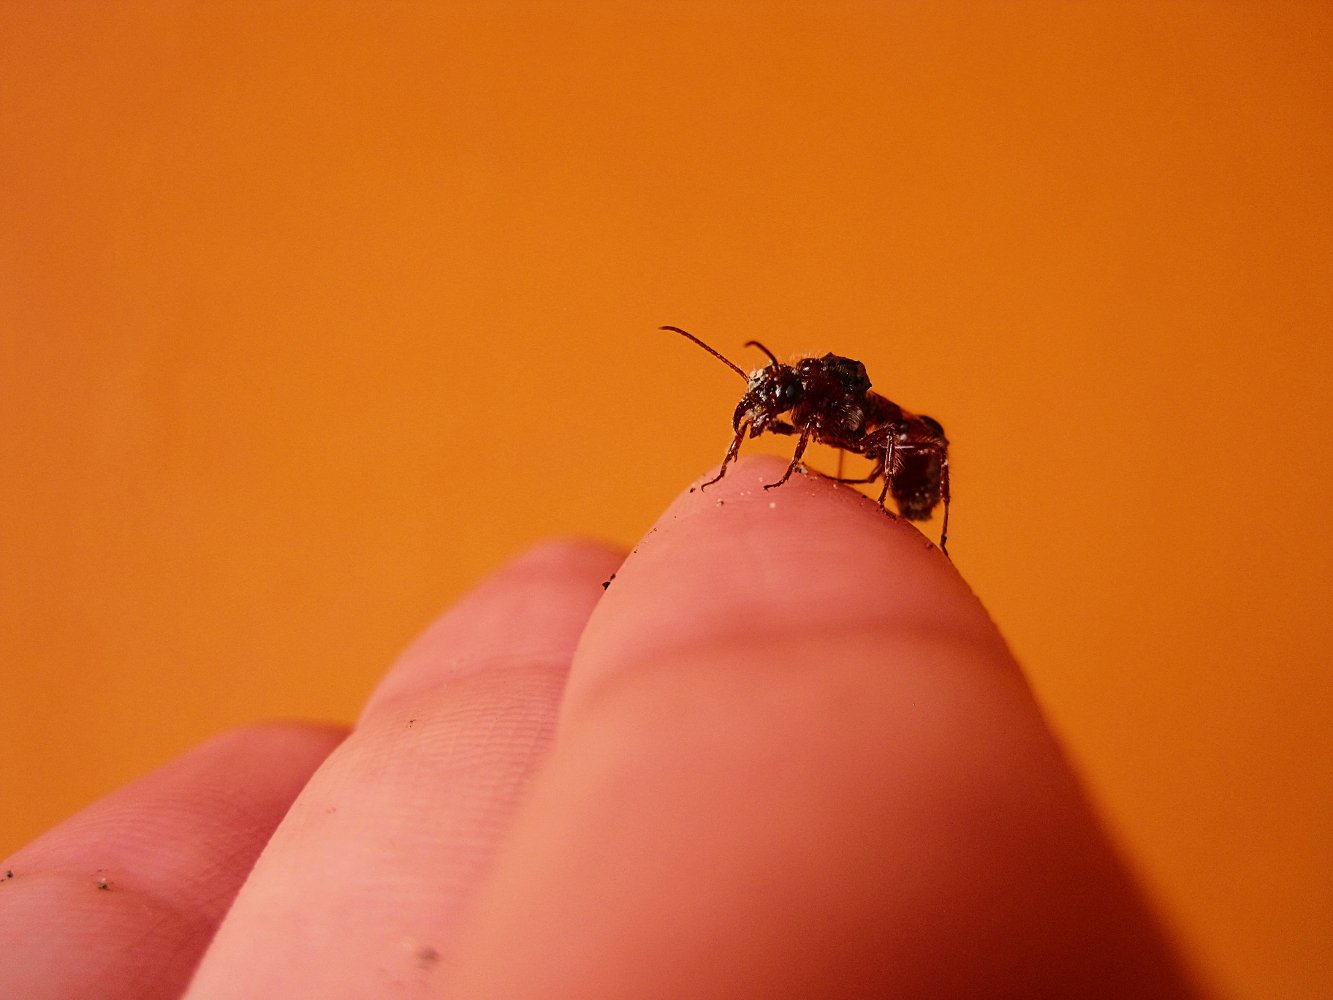 a fly resting on a human finger in a yellow room